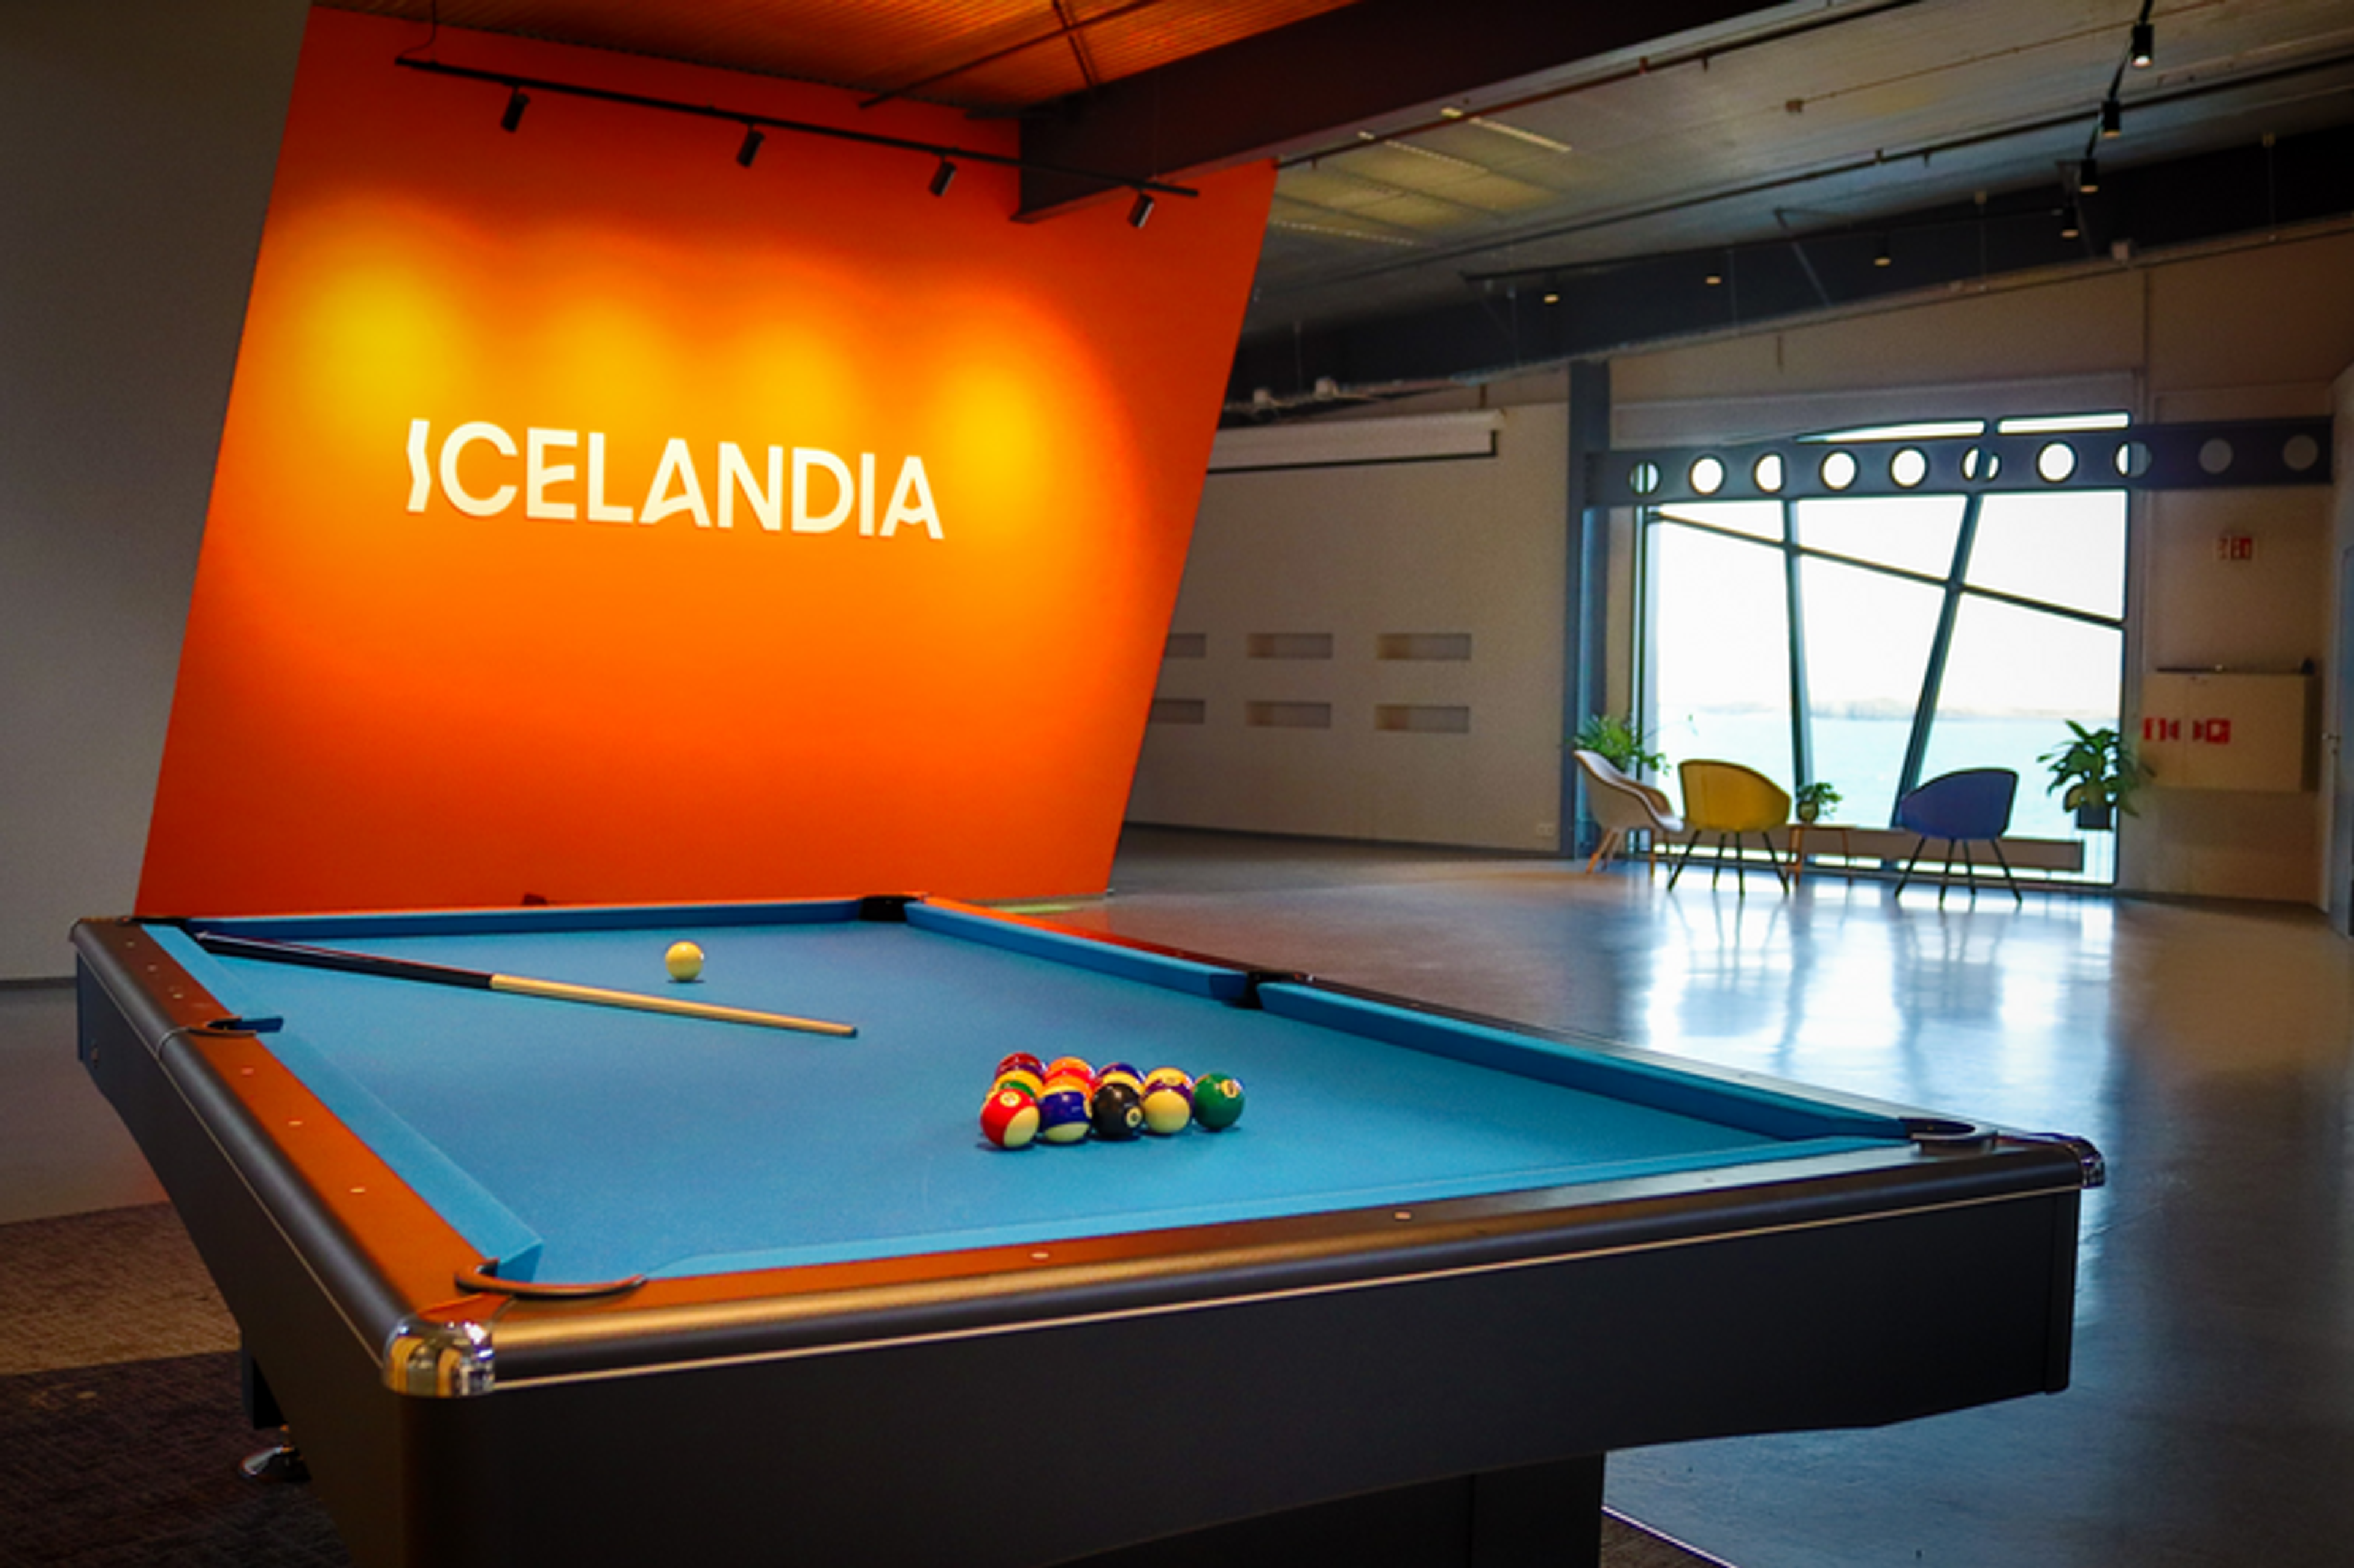  A recreational area with a pool table at the center, under overhead lighting. The wall is prominently branded with "ICELANDIA" in large, orange letters, giving the space a vibrant and energetic feel.